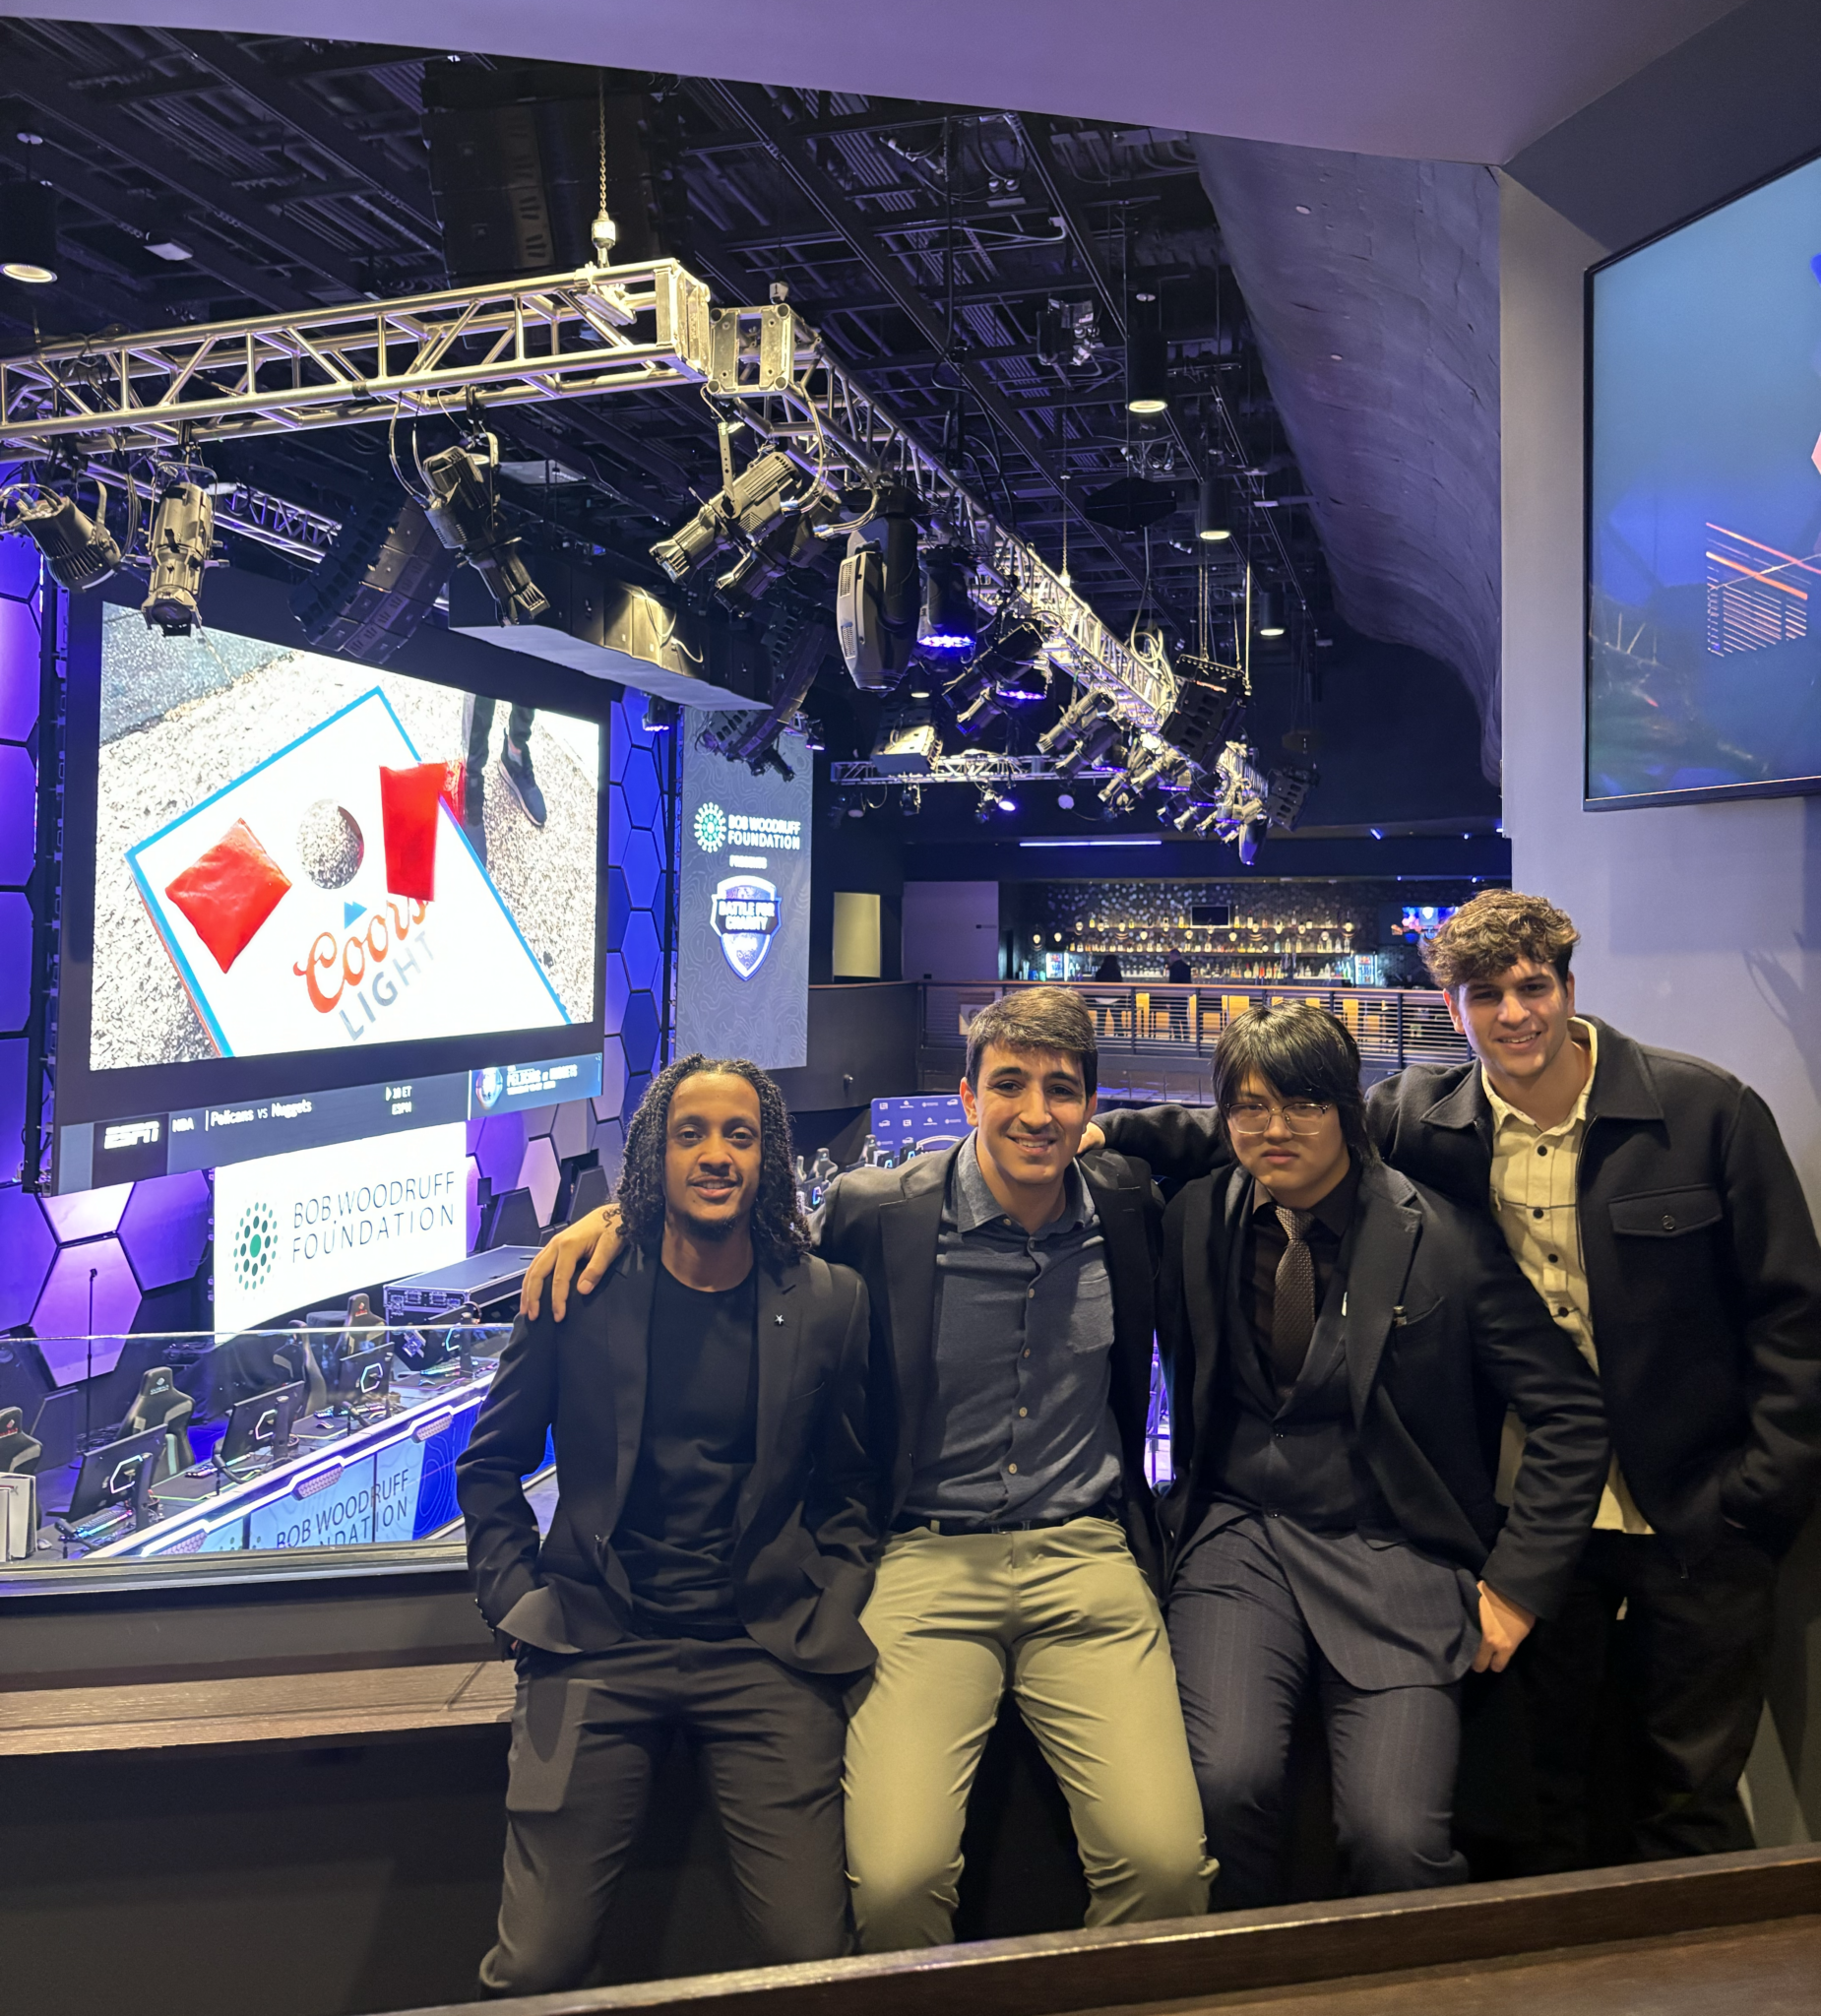 4 people pose together in an esports arena